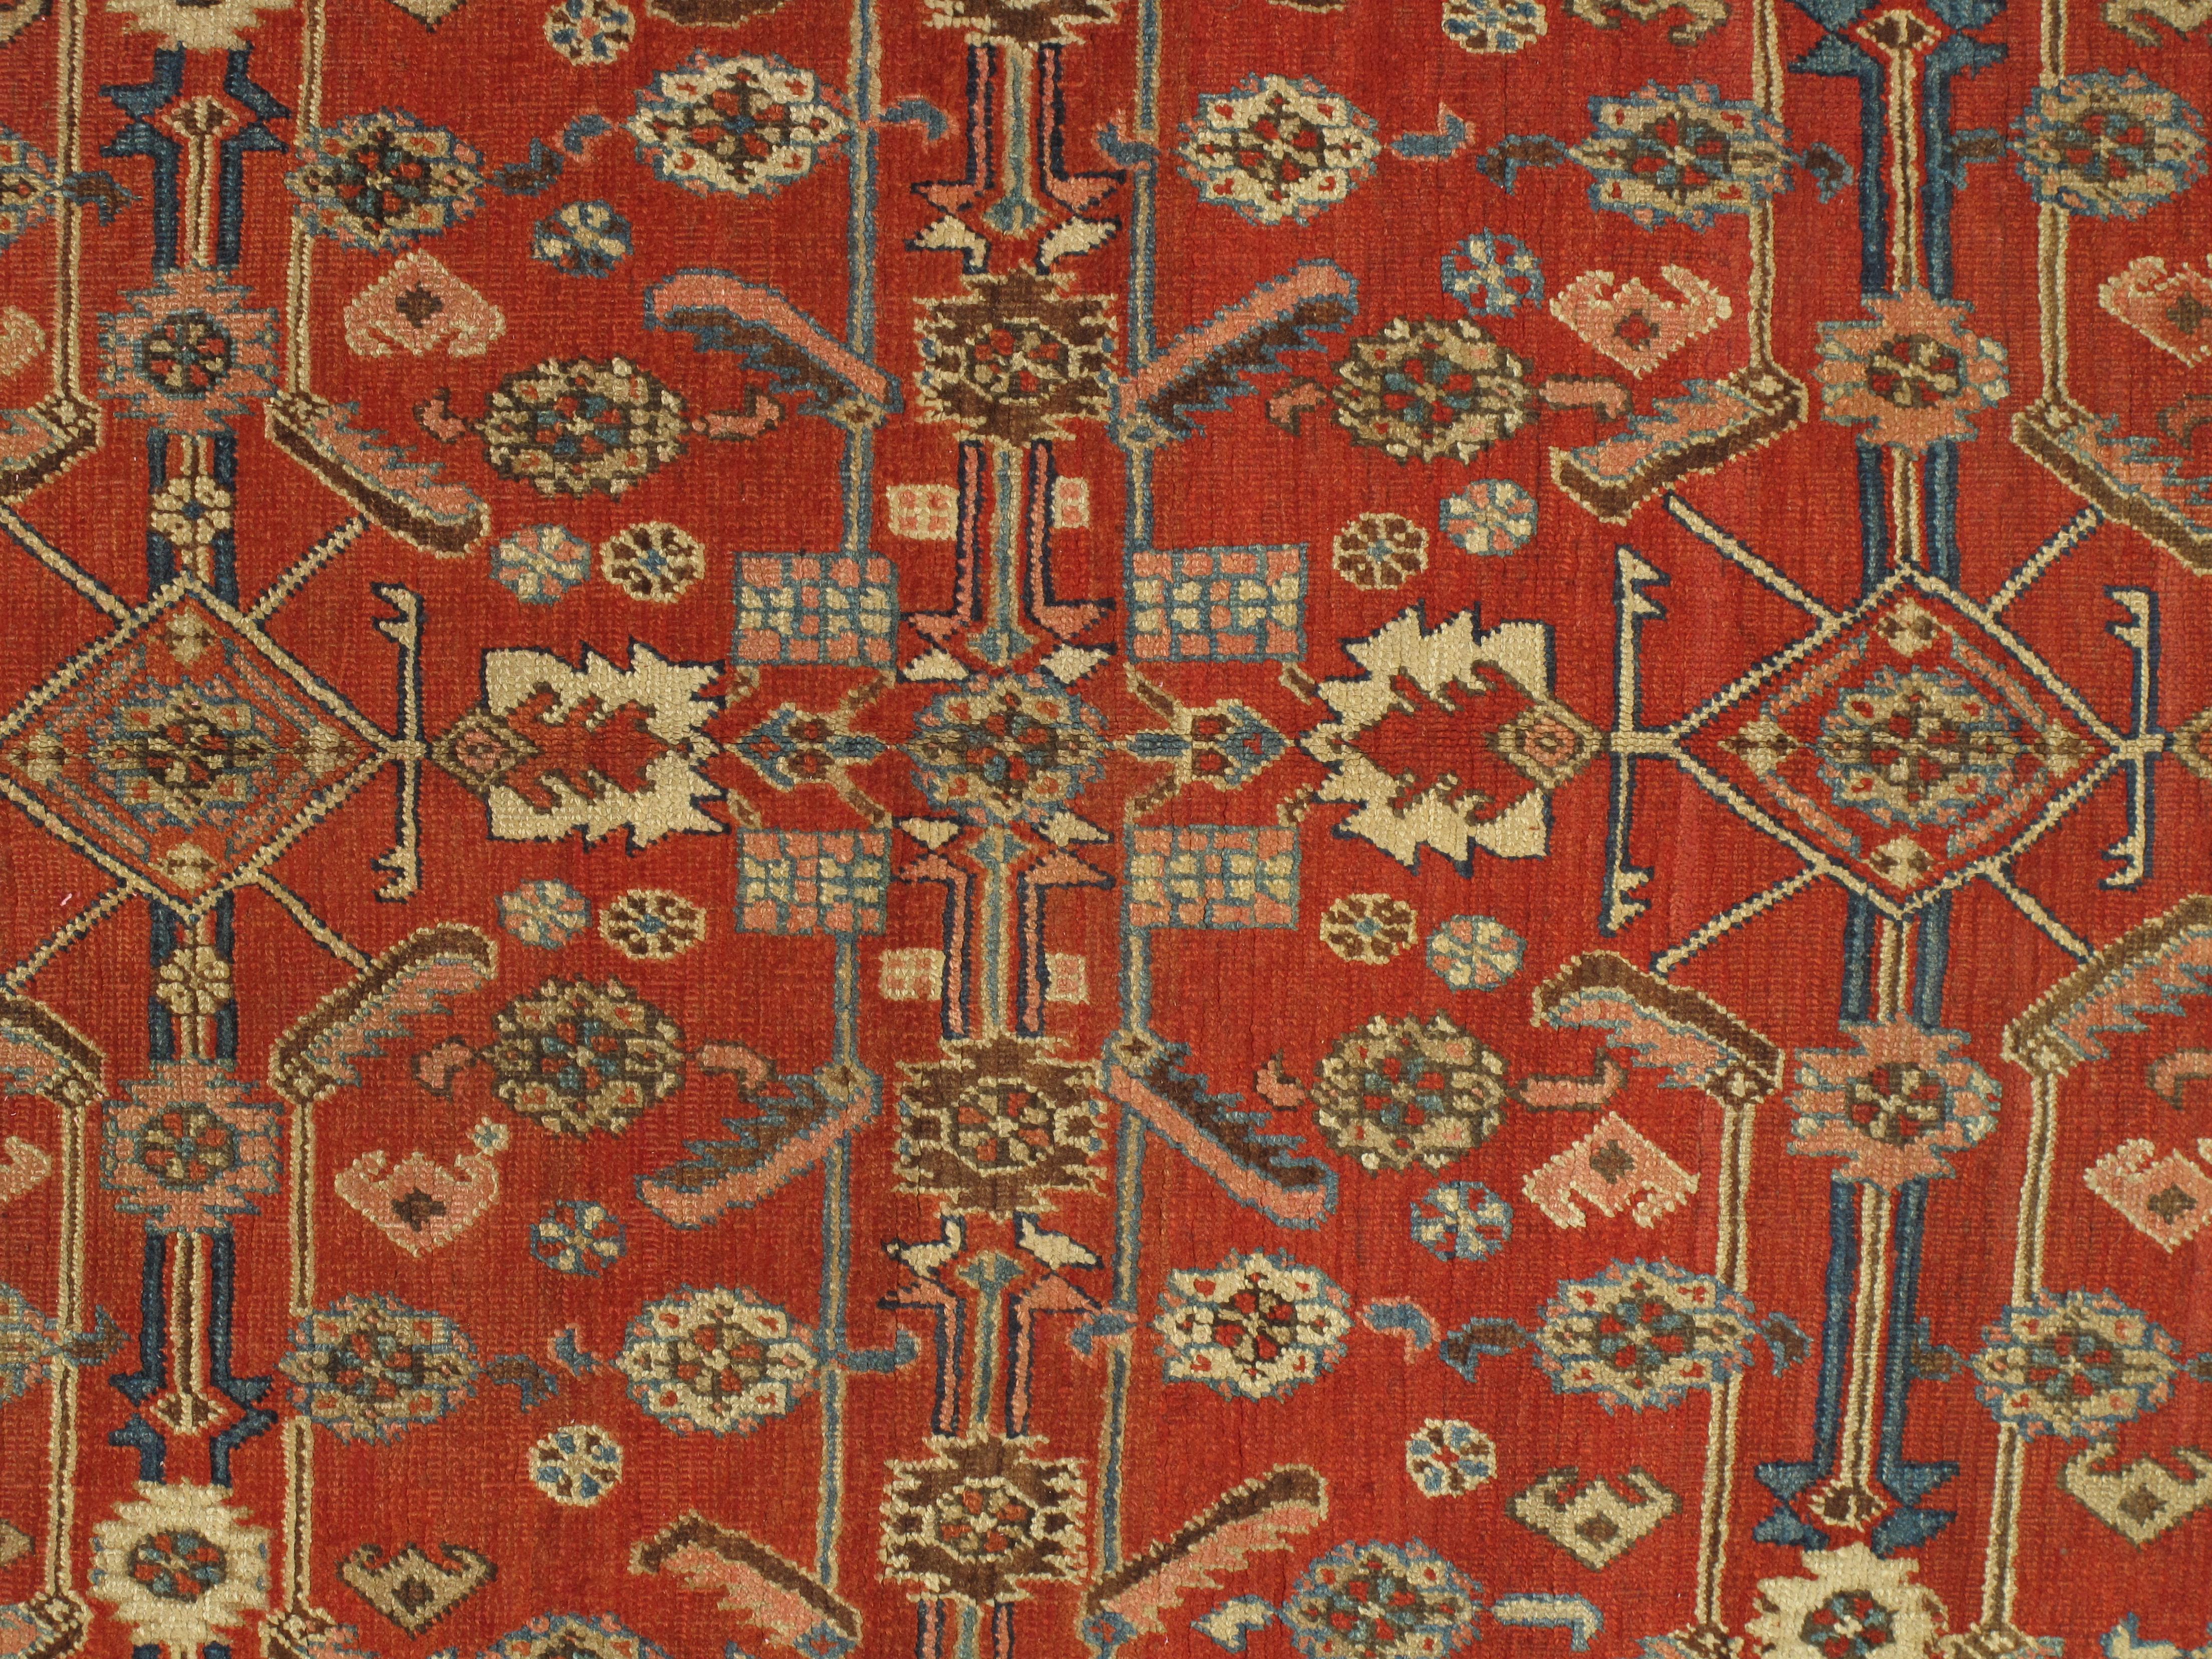 Antique Bakhshaish / Serapi carpets are one of the most sought after rugs particularly in America and England for many years. Antique Serapi rugs are a major draw particularly in big city America. Serapi carpets were woven on the level of small